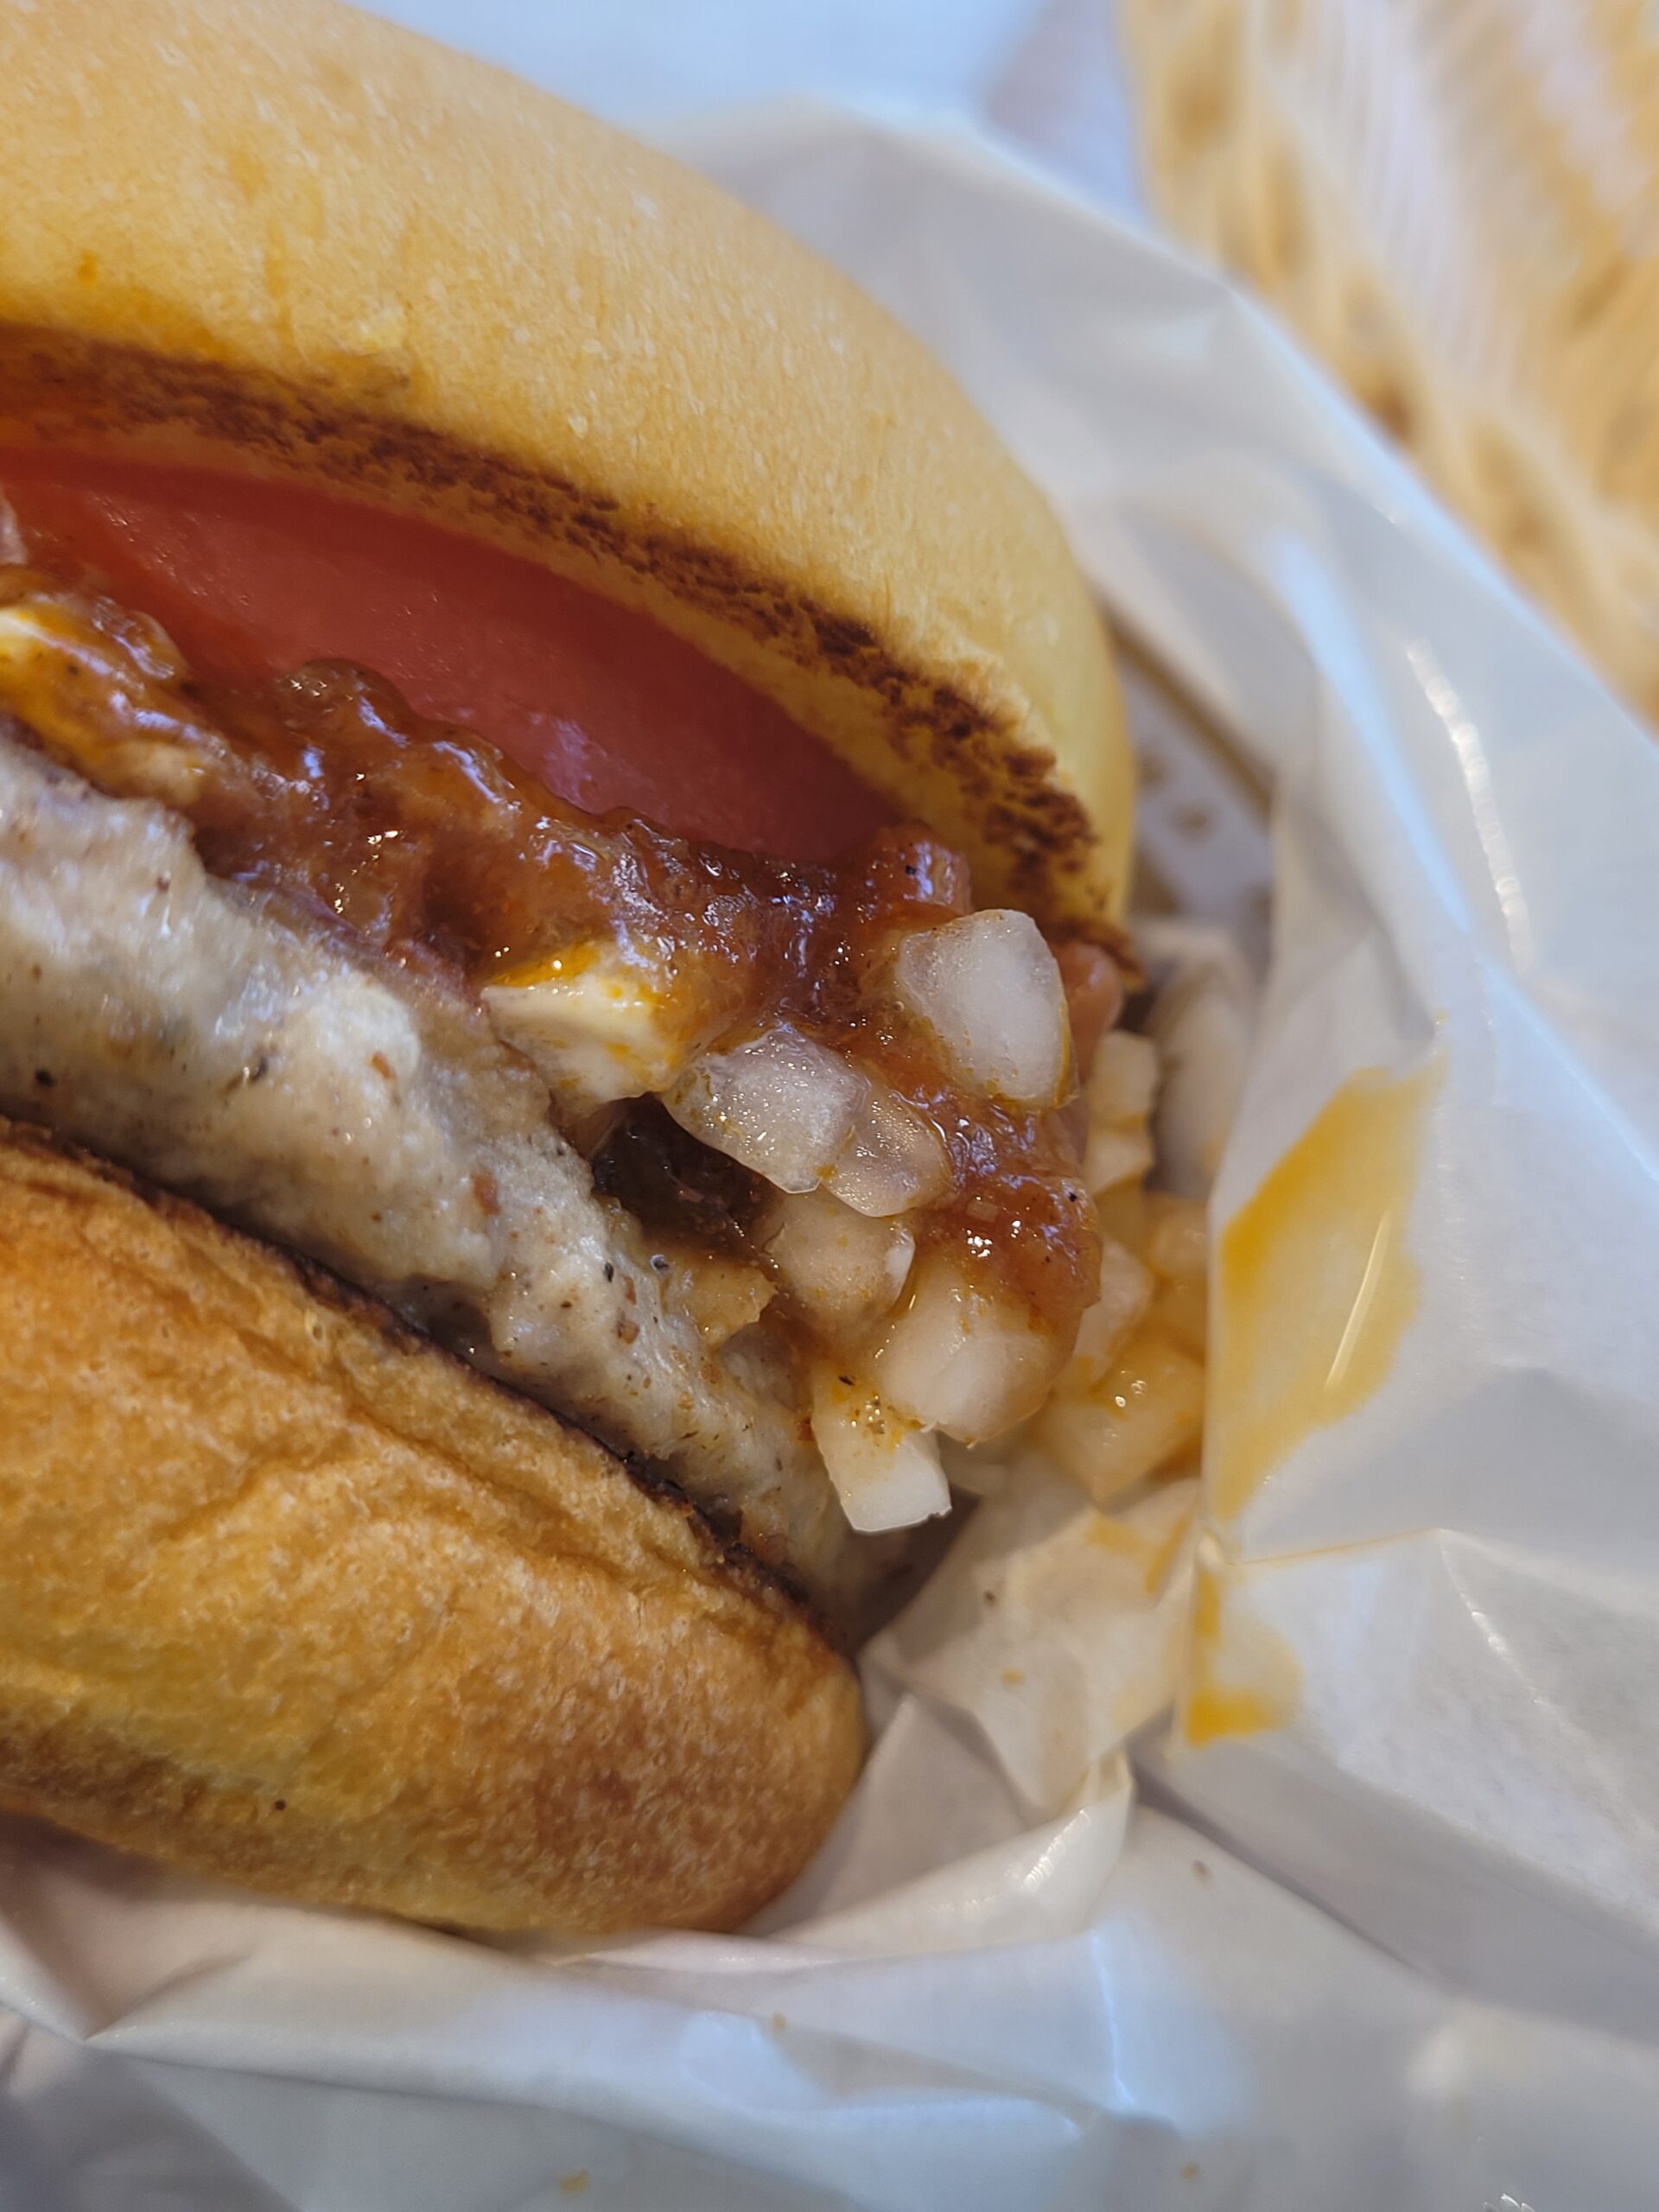 Freshness Burger is more than your average burger joint